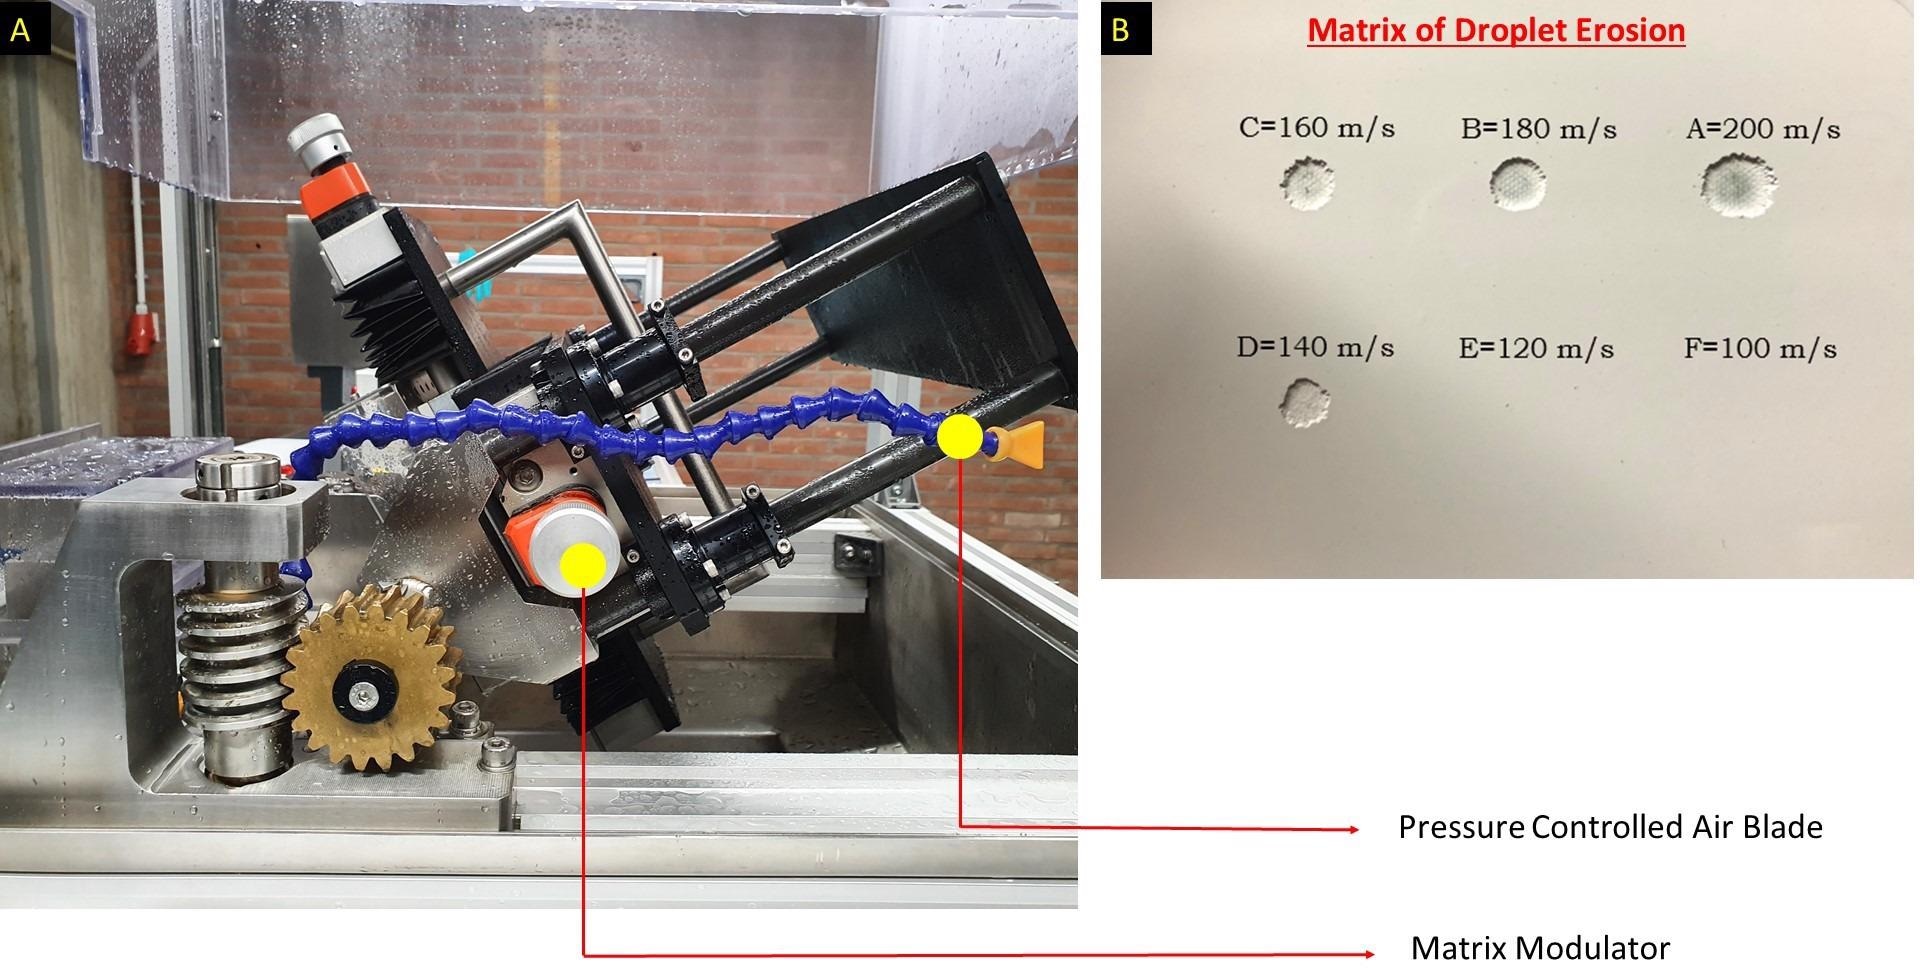 Ducom Water Droplet Erosion Tester (WDE) is equipped with a pressure controlled air blade and matrix modulator (A). Matrix modulator is used to generate a matrix of erosion wear on the same surface (B).